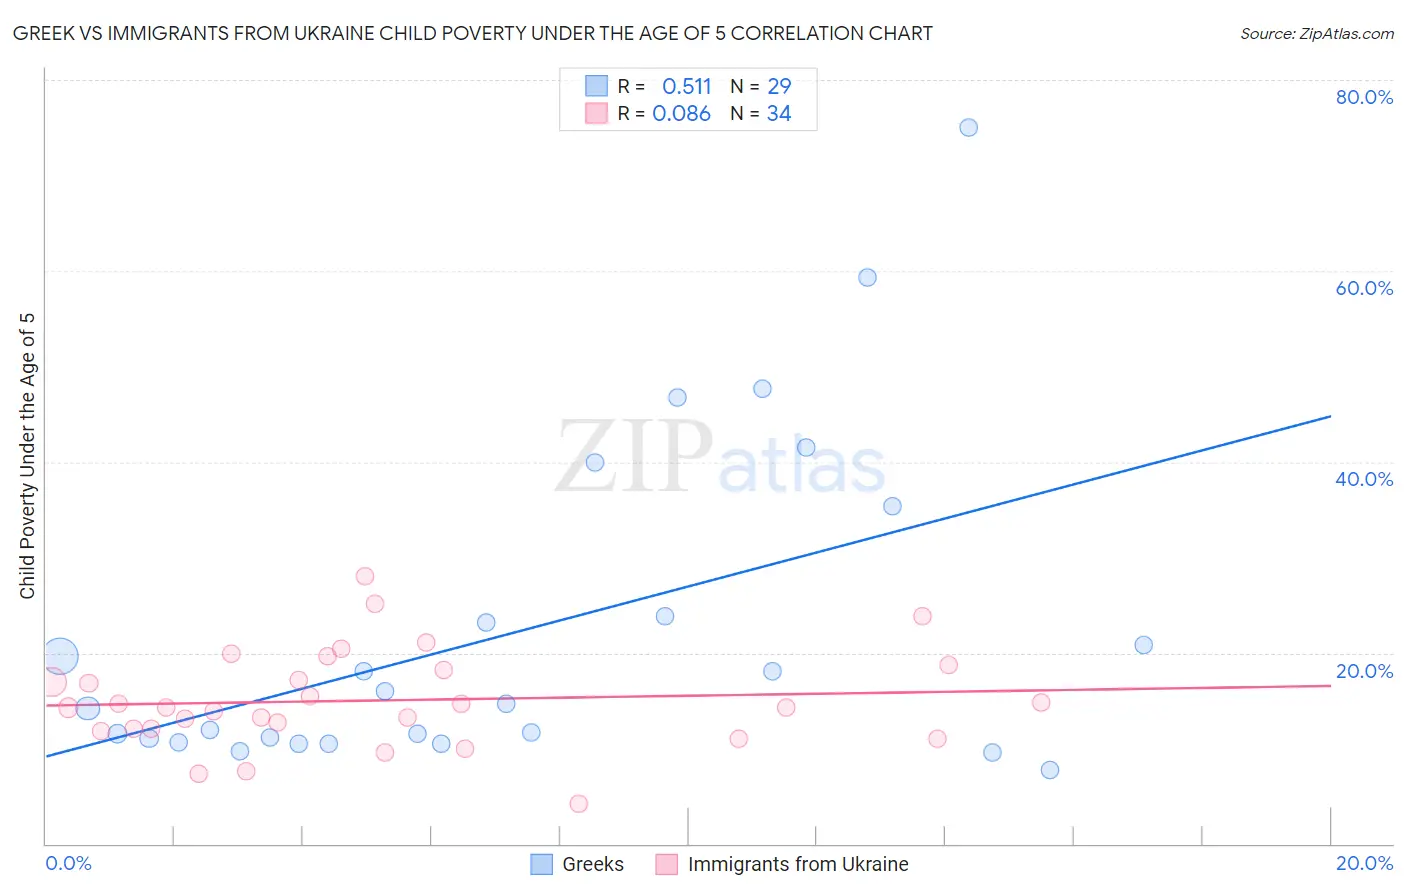 Greek vs Immigrants from Ukraine Child Poverty Under the Age of 5